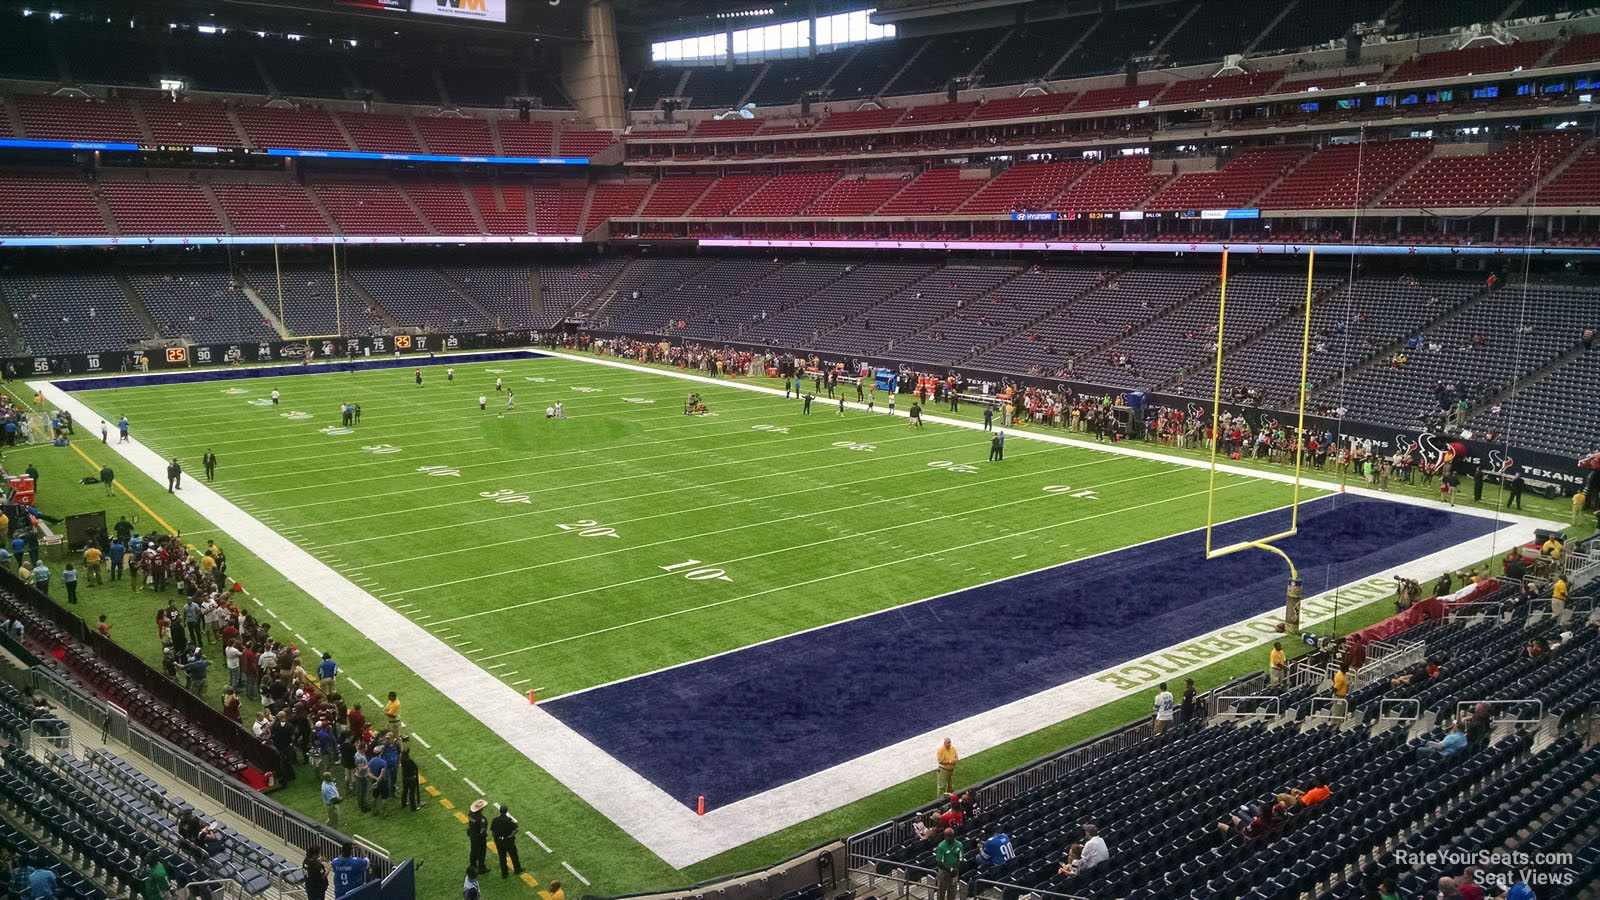 section 328, row a seat view  for football - nrg stadium